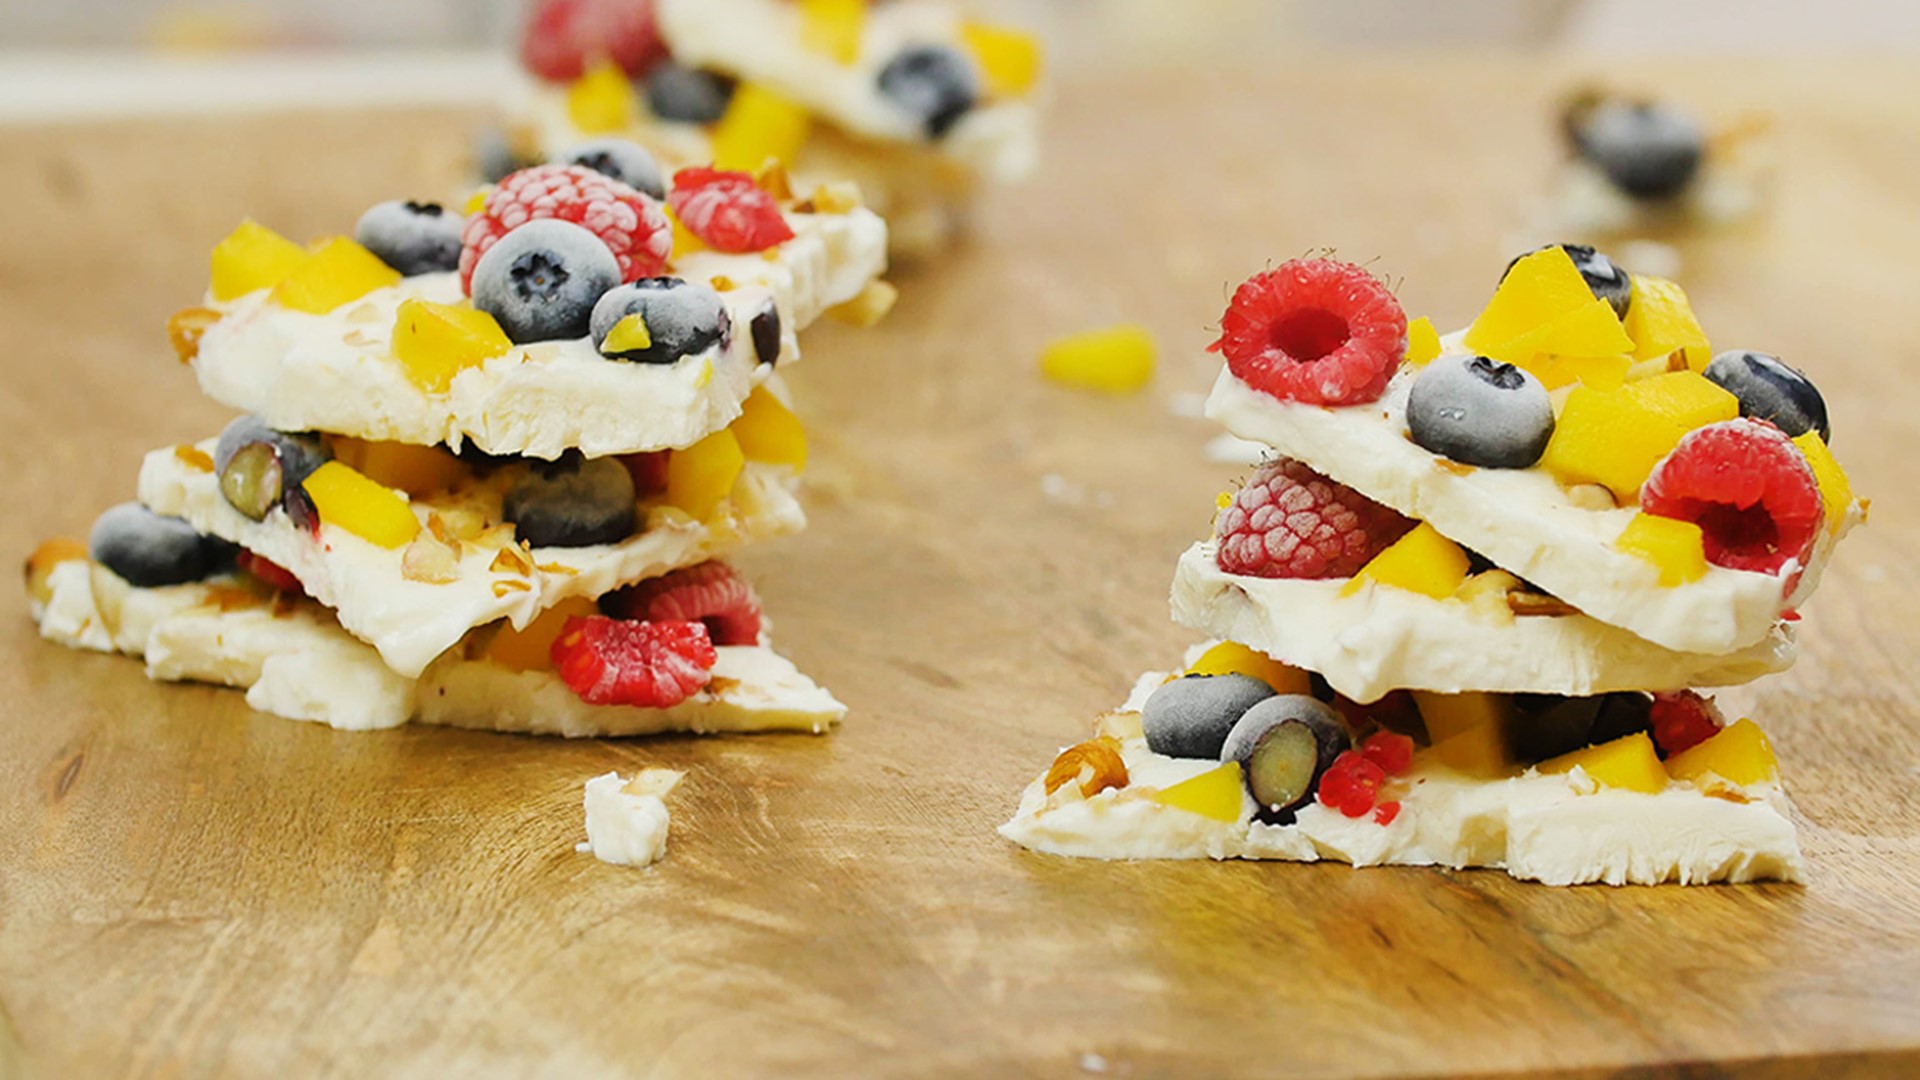 The American Heart Association shared the recipe for frozen yogurt bark as a healthier treat for kids this summer.